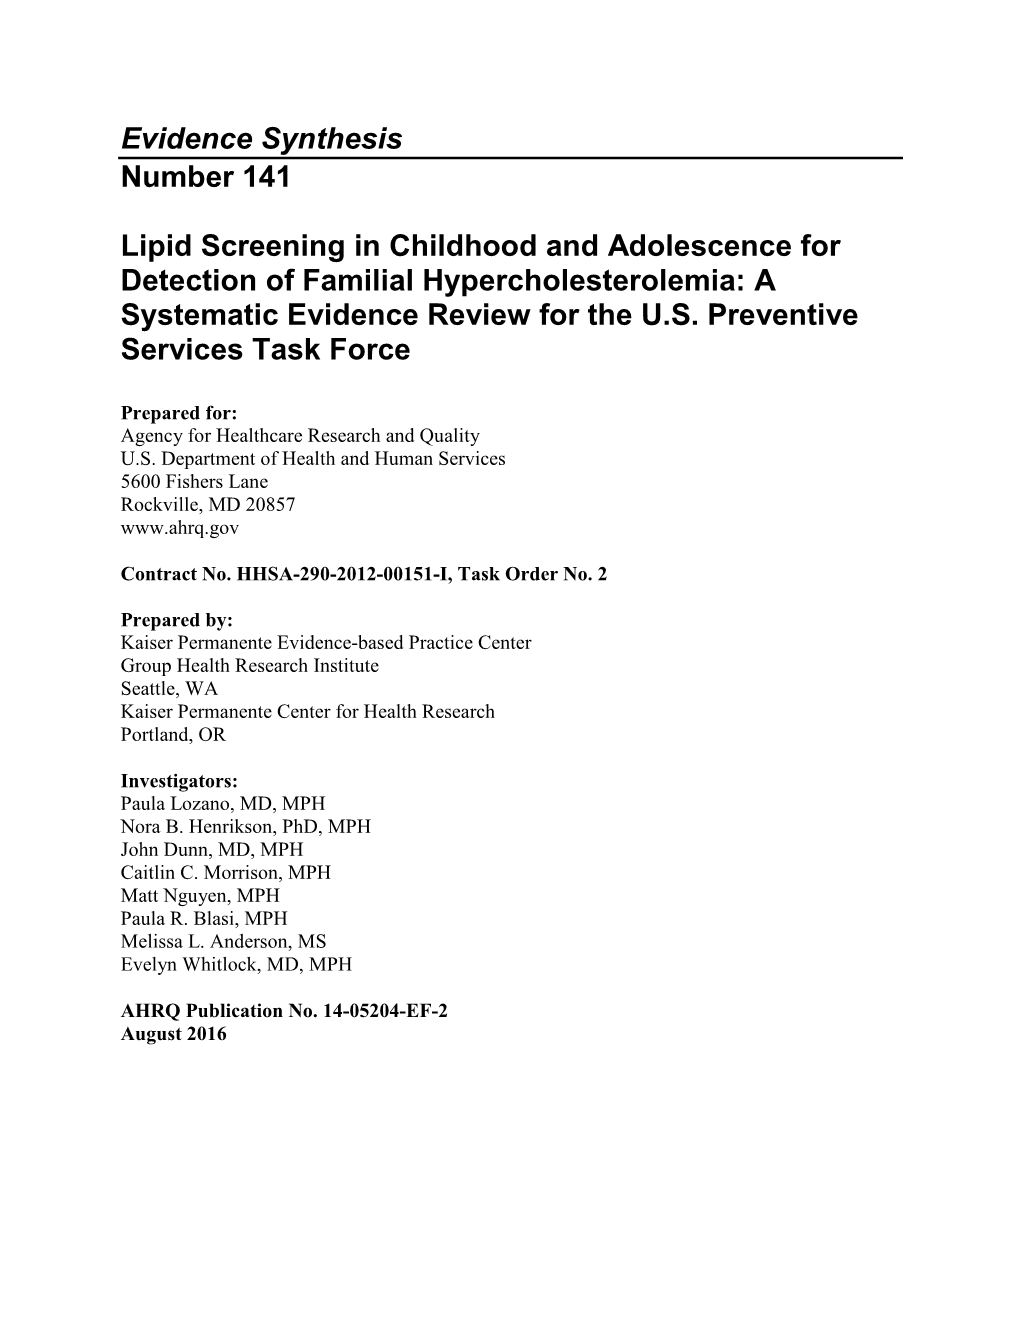 Lipid Screening in Childhood and Adolescence for Detection of Familial Hypercholesterolemia: a Systematic Evidence Review for the U.S